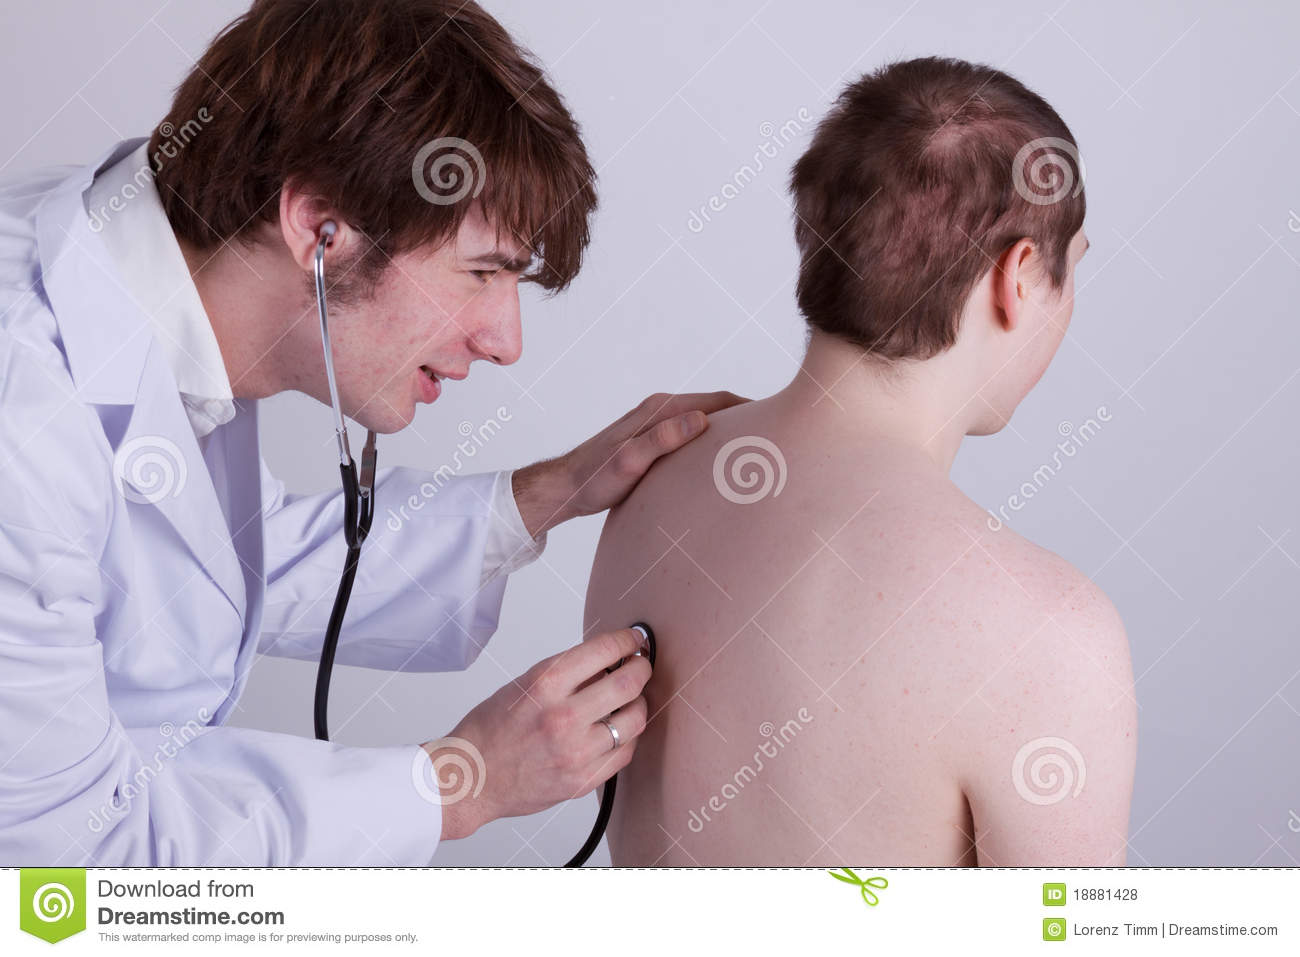 Royalty Free Images Doctor and Patient